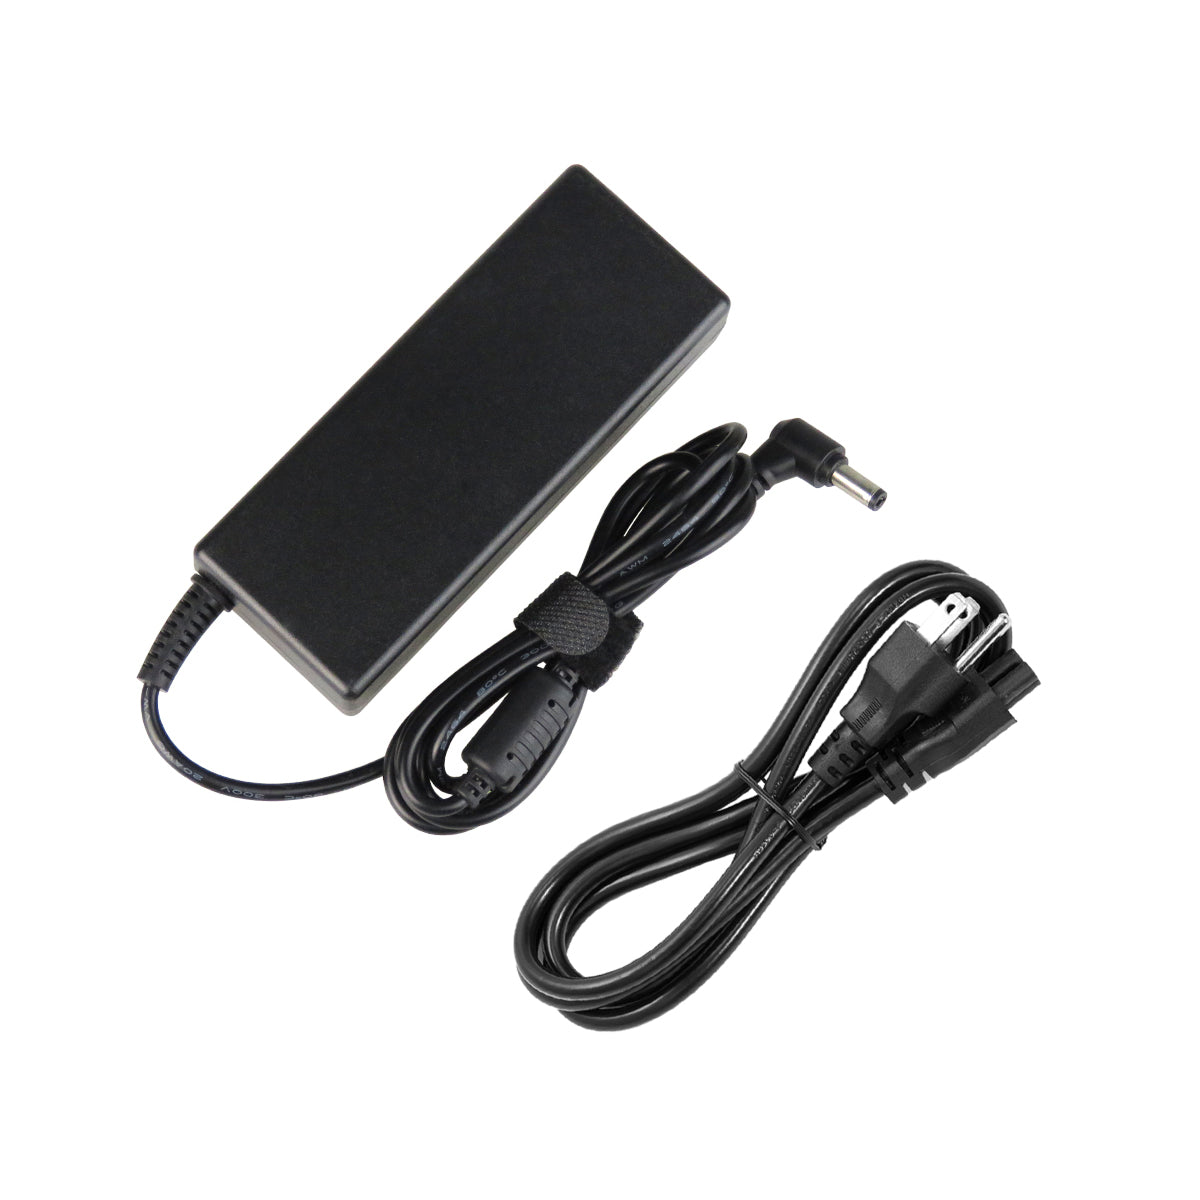 AC Adapter Charger for ASUS A56 Notebook.